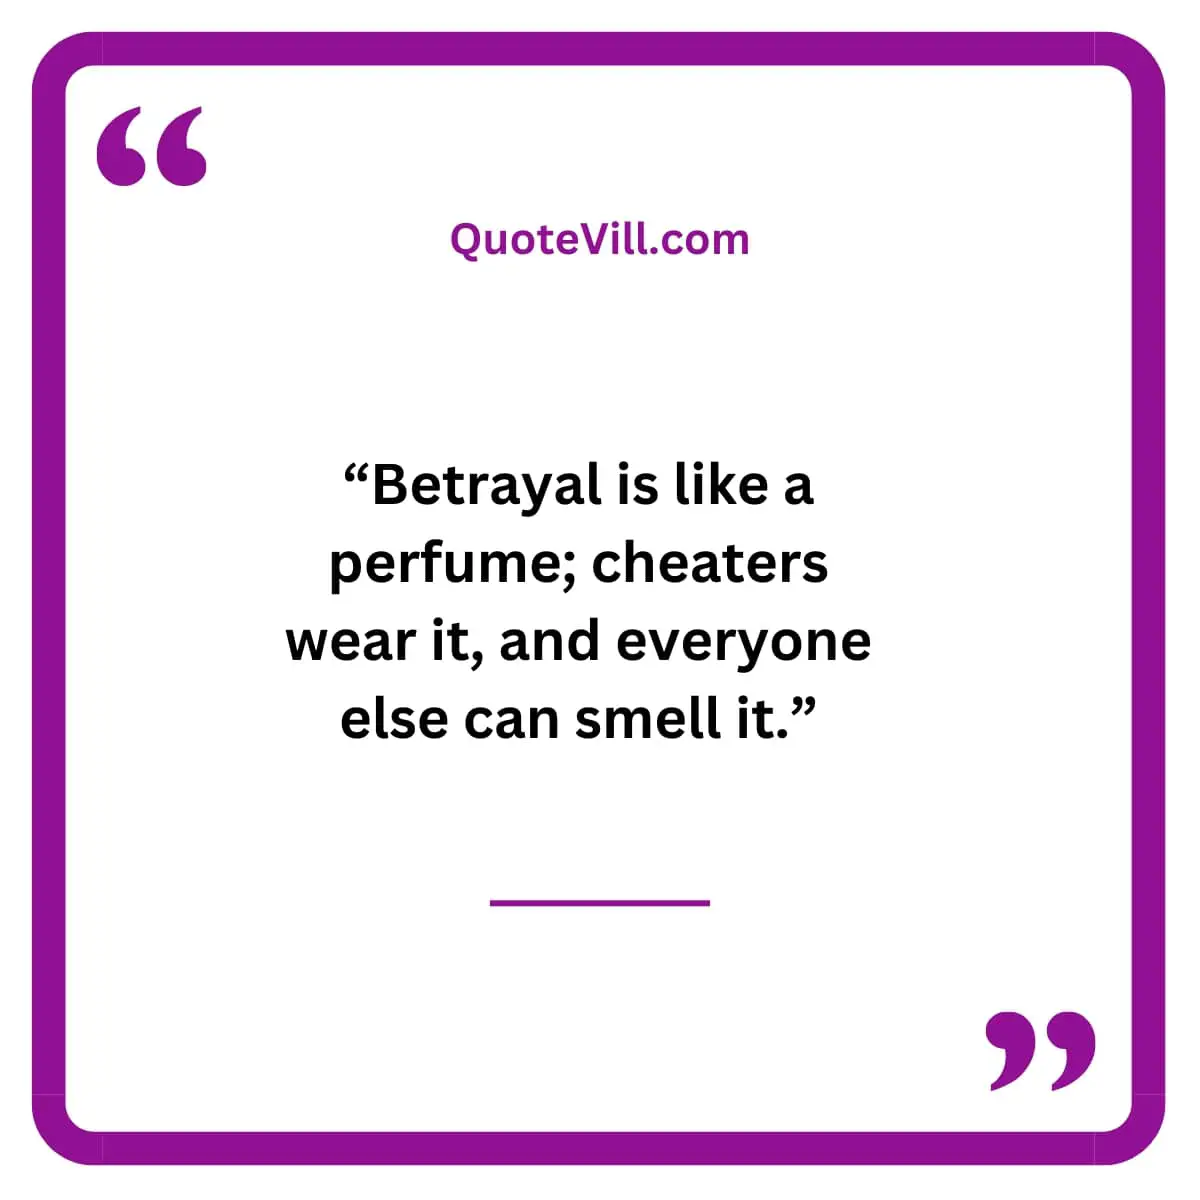 Savage Quotes for Cheaters In a Relationship